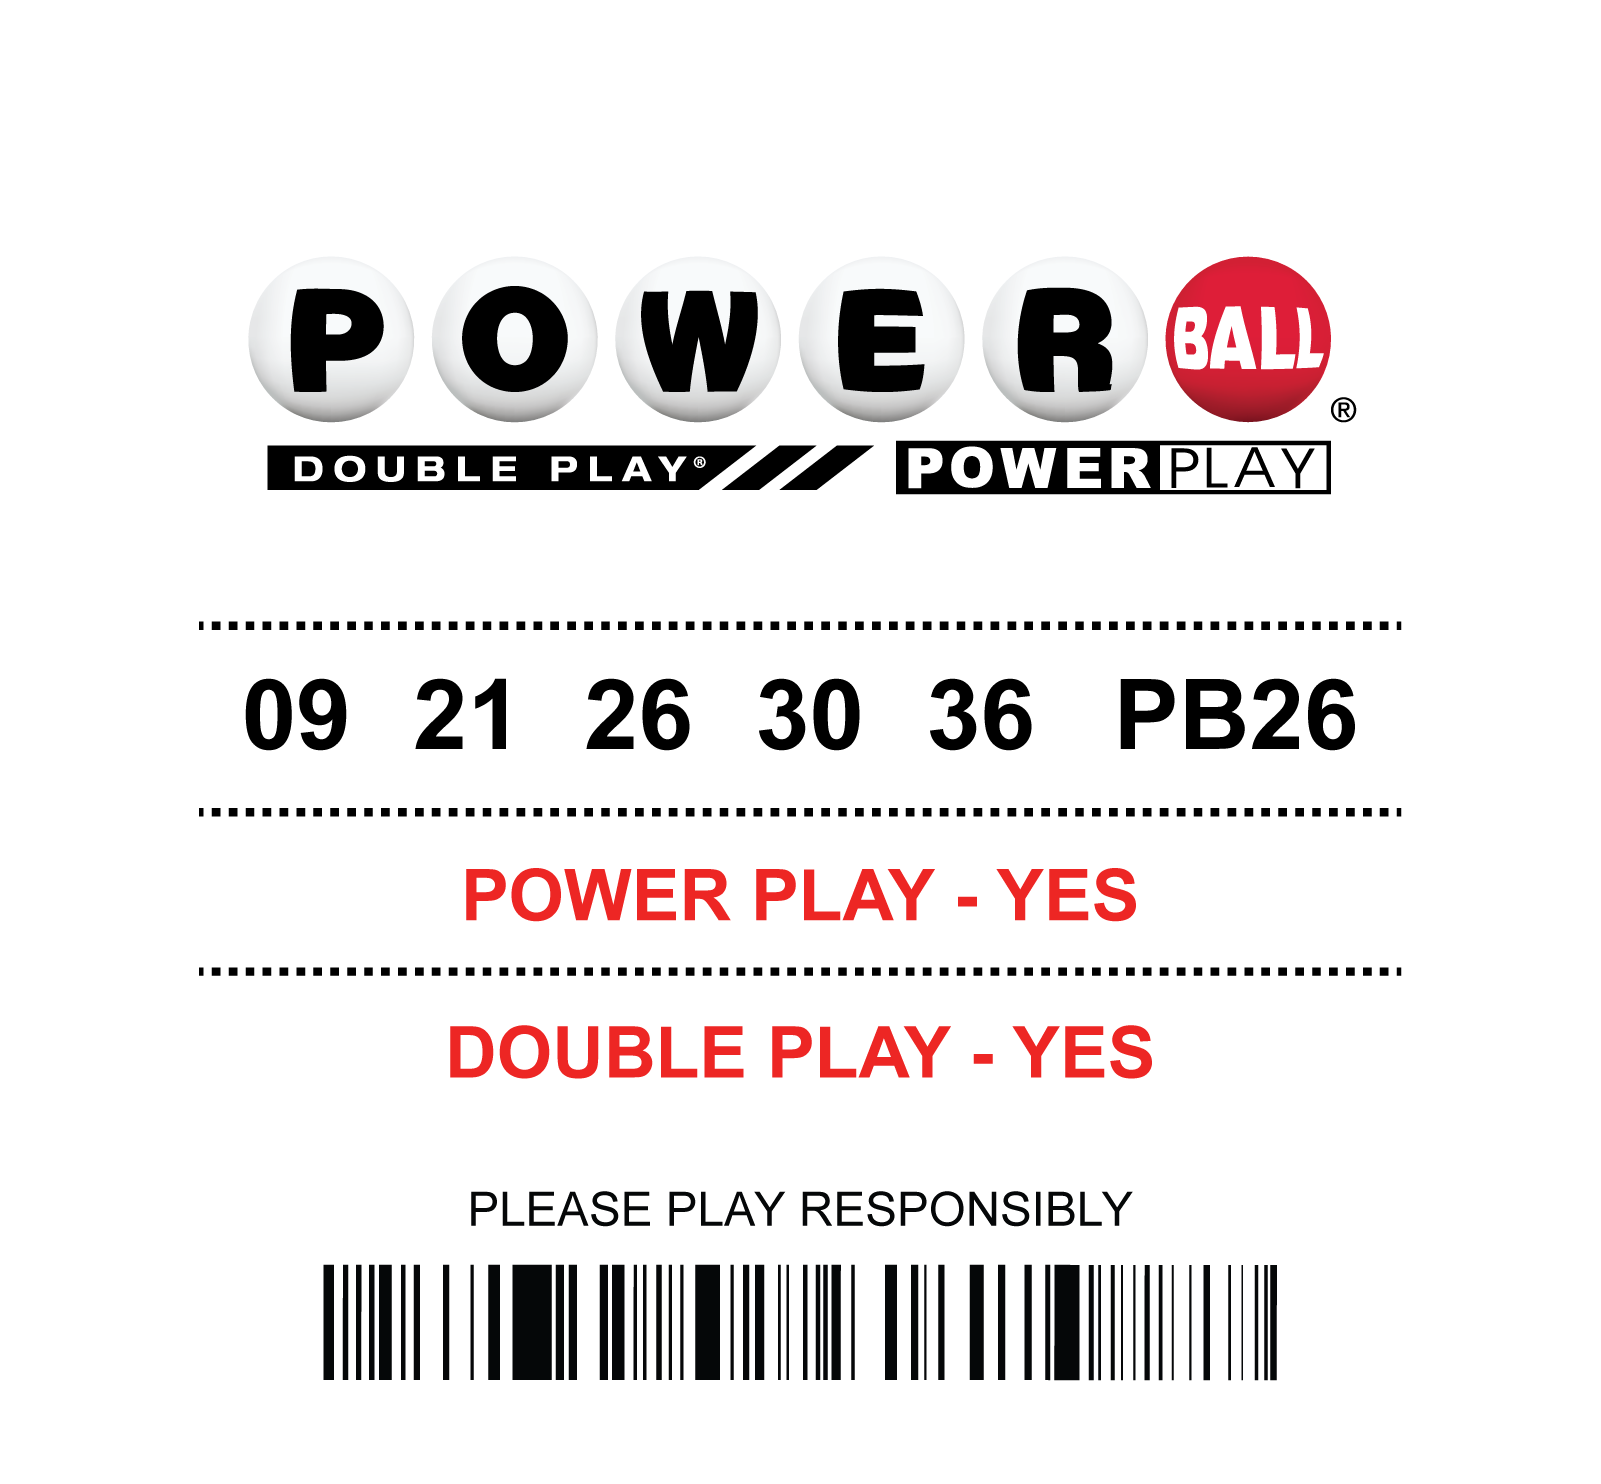 The Best 6 Powerball Numbers For Saturday April 17Th centurytrendbox